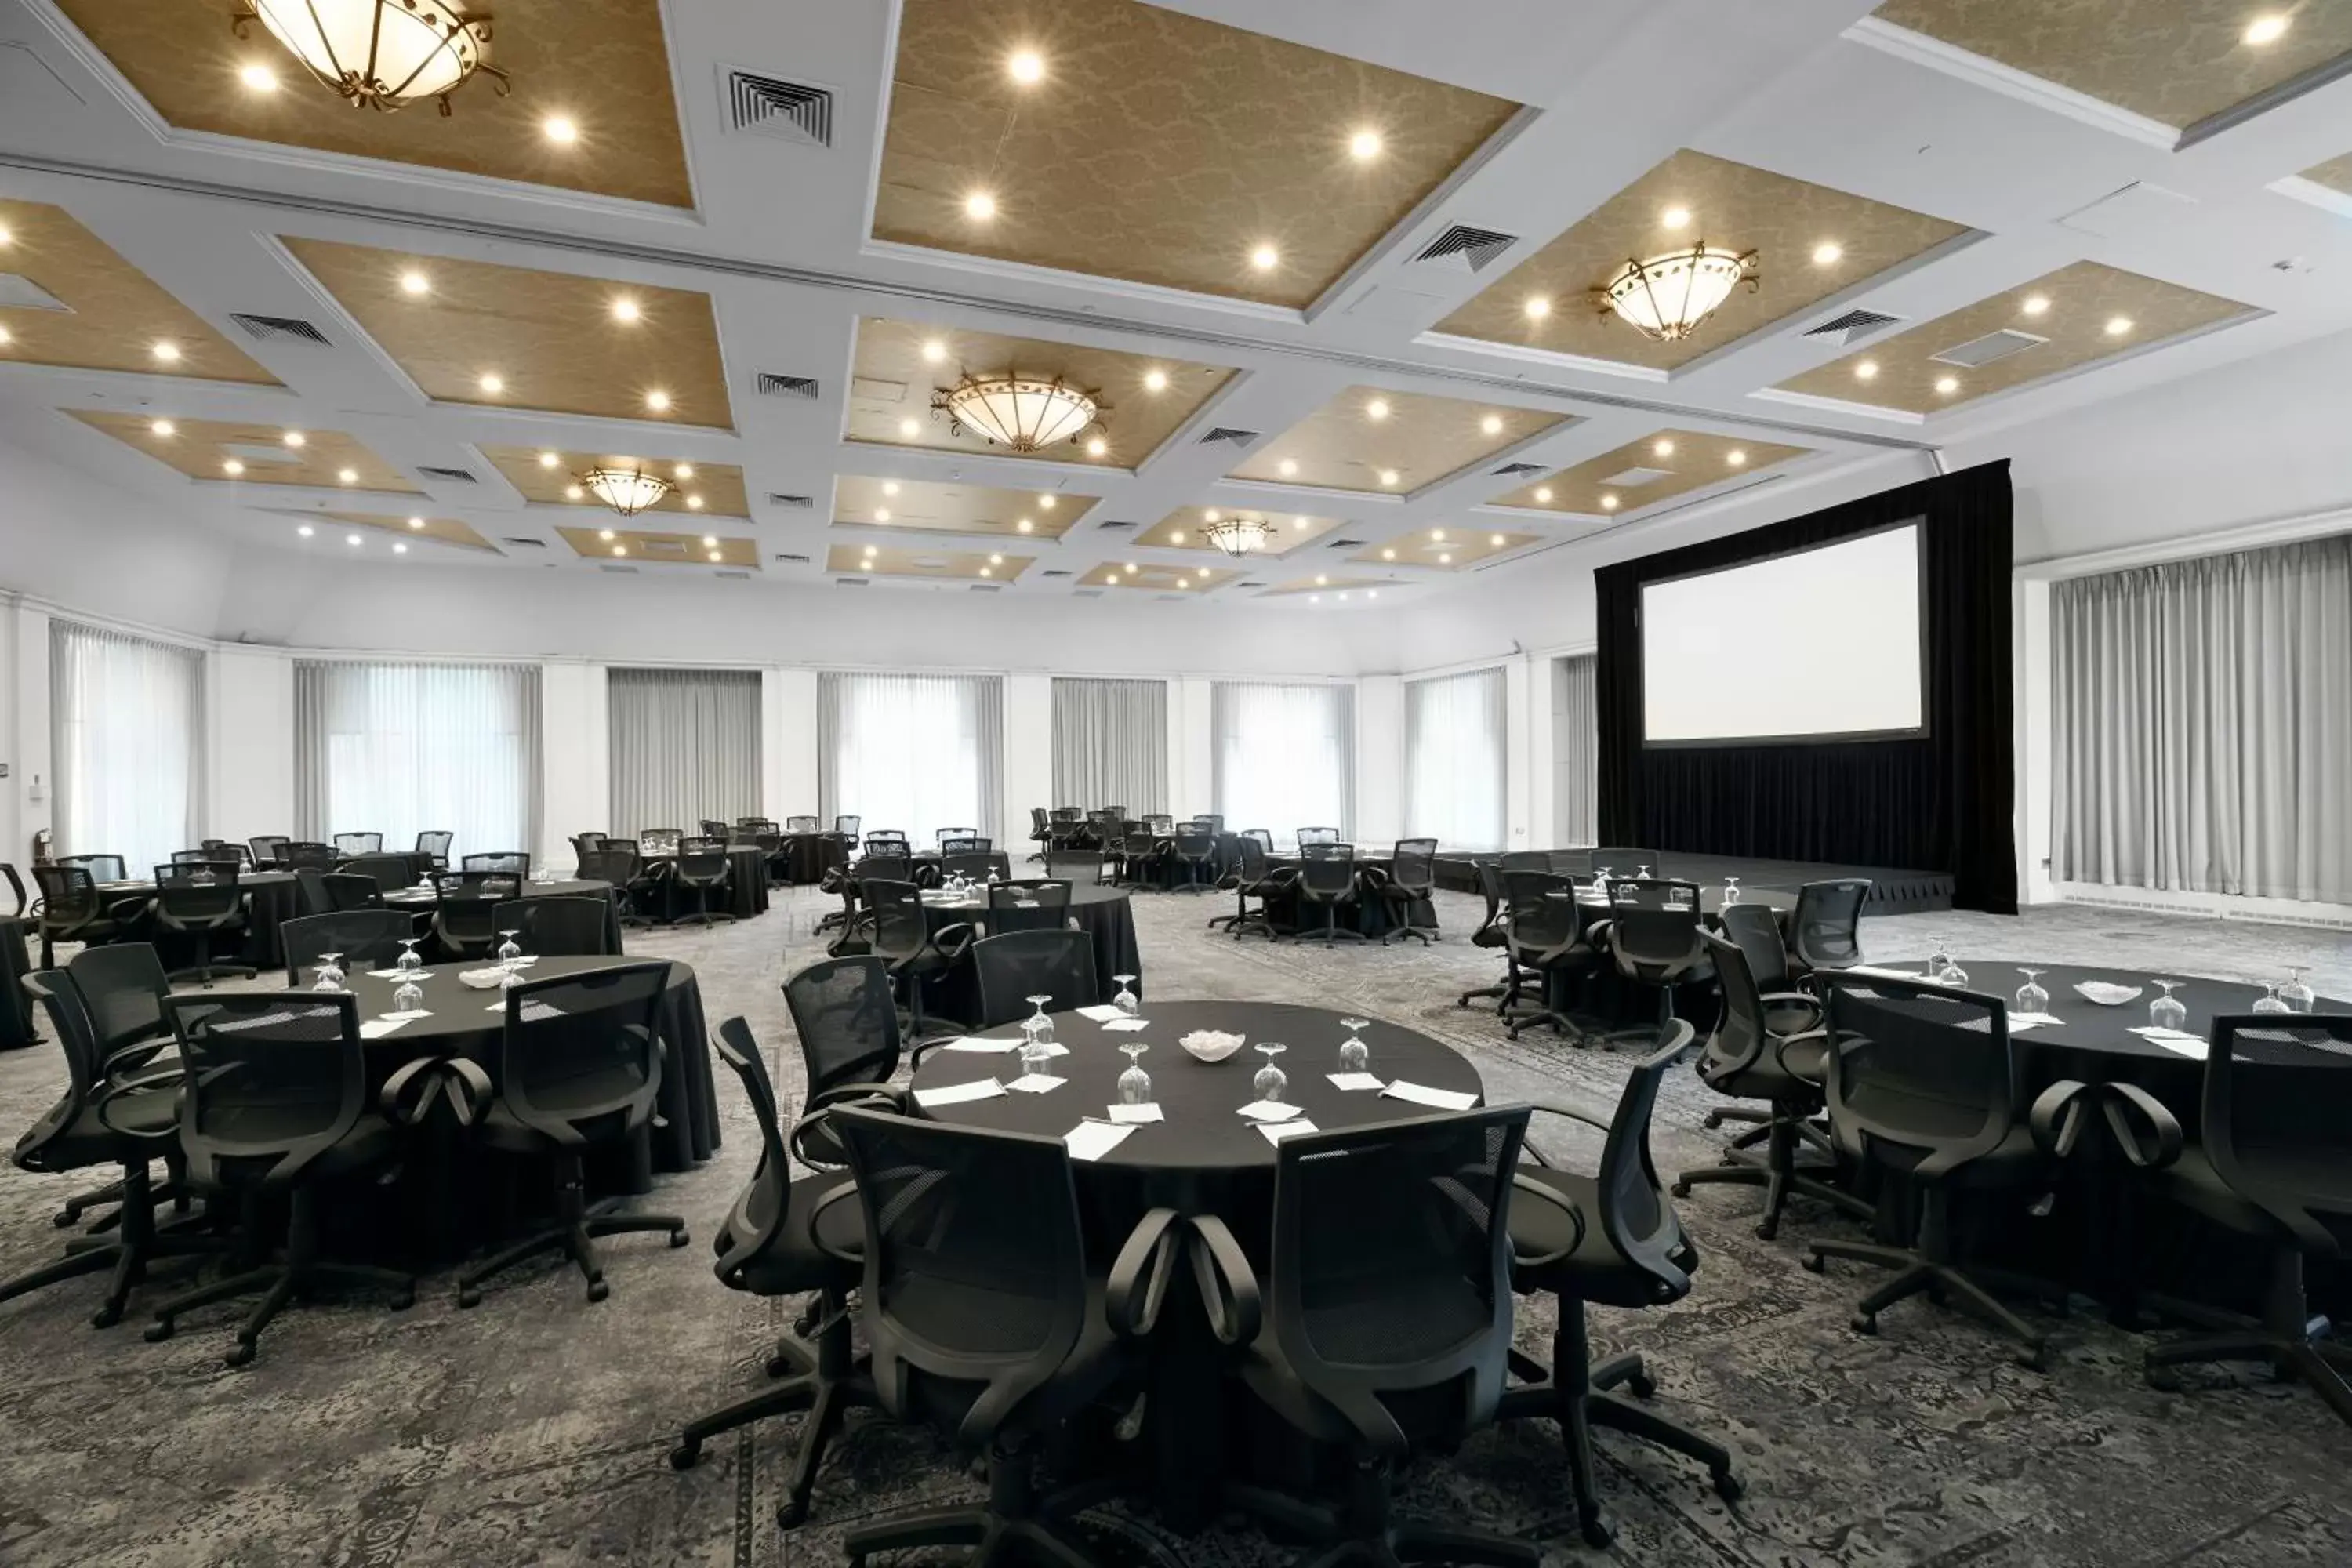 Meeting/conference room, Banquet Facilities in Tarrytown House Estate on the Hudson